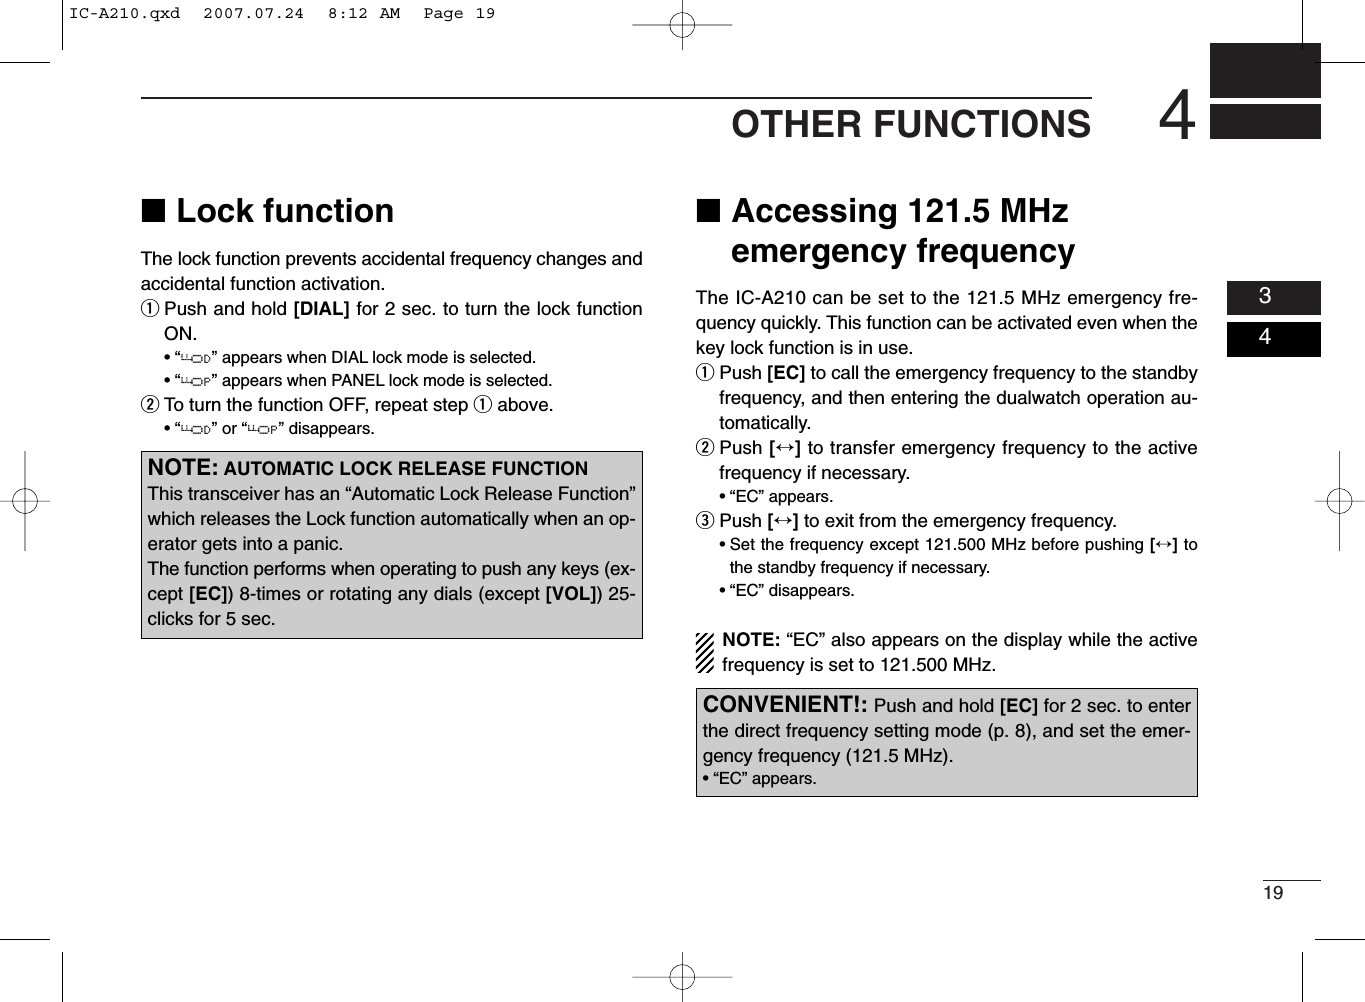 194OTHER FUNCTIONS0304■Lock functionThe lock function prevents accidental frequency changes andaccidental function activation.qPush and hold [DIAL] for 2 sec. to turn the lock functionON.• “ ” appears when DIAL lock mode is selected.• “ ” appears when PANEL lock mode is selected.wTo turn the function OFF, repeat step qabove.• “ ” or “ ” disappears.■Accessing 121.5 MHzemergency frequencyThe IC-A210 can be set to the 121.5 MHz emergency fre-quency quickly. This function can be activated even when thekey lock function is in use.qPush [EC] to call the emergency frequency to the standbyfrequency, and then entering the dualwatch operation au-tomatically.wPush [↔]to transfer emergency frequency to the activefrequency if necessary.• “EC” appears.ePush [↔]to exit from the emergency frequency.• Set the frequency except 121.500 MHz before pushing [↔]tothe standby frequency if necessary.• “EC” disappears.NOTE: “EC” also appears on the display while the activefrequency is set to 121.500 MHz.OPODOPODNOTE: AUTOMATIC LOCK RELEASE FUNCTIONThis transceiver has an “Automatic Lock Release Function”which releases the Lock function automatically when an op-erator gets into a panic.The function performs when operating to push any keys (ex-cept [EC]) 8-times or rotating any dials (except [VOL]) 25-clicks for 5 sec.CONVENIENT!: Push and hold [EC] for 2 sec. to enterthe direct frequency setting mode (p. 8), and set the emer-gency frequency (121.5 MHz).• “EC” appears.IC-A210.qxd  2007.07.24  8:12 AM  Page 19